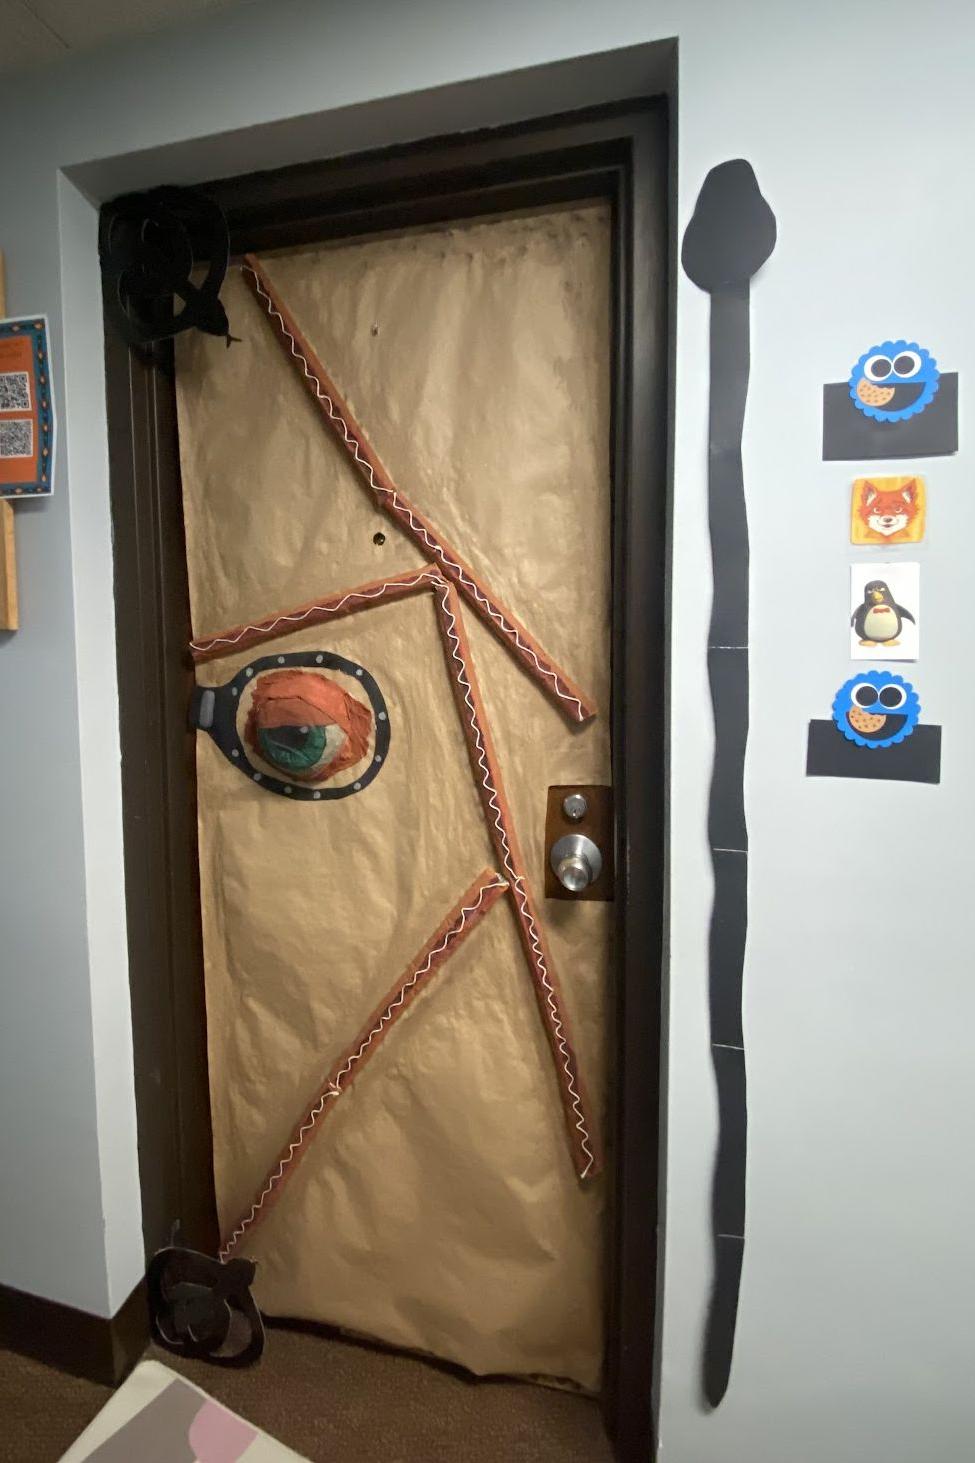 A dorm door with a patchwork of skin with an eye staring out.